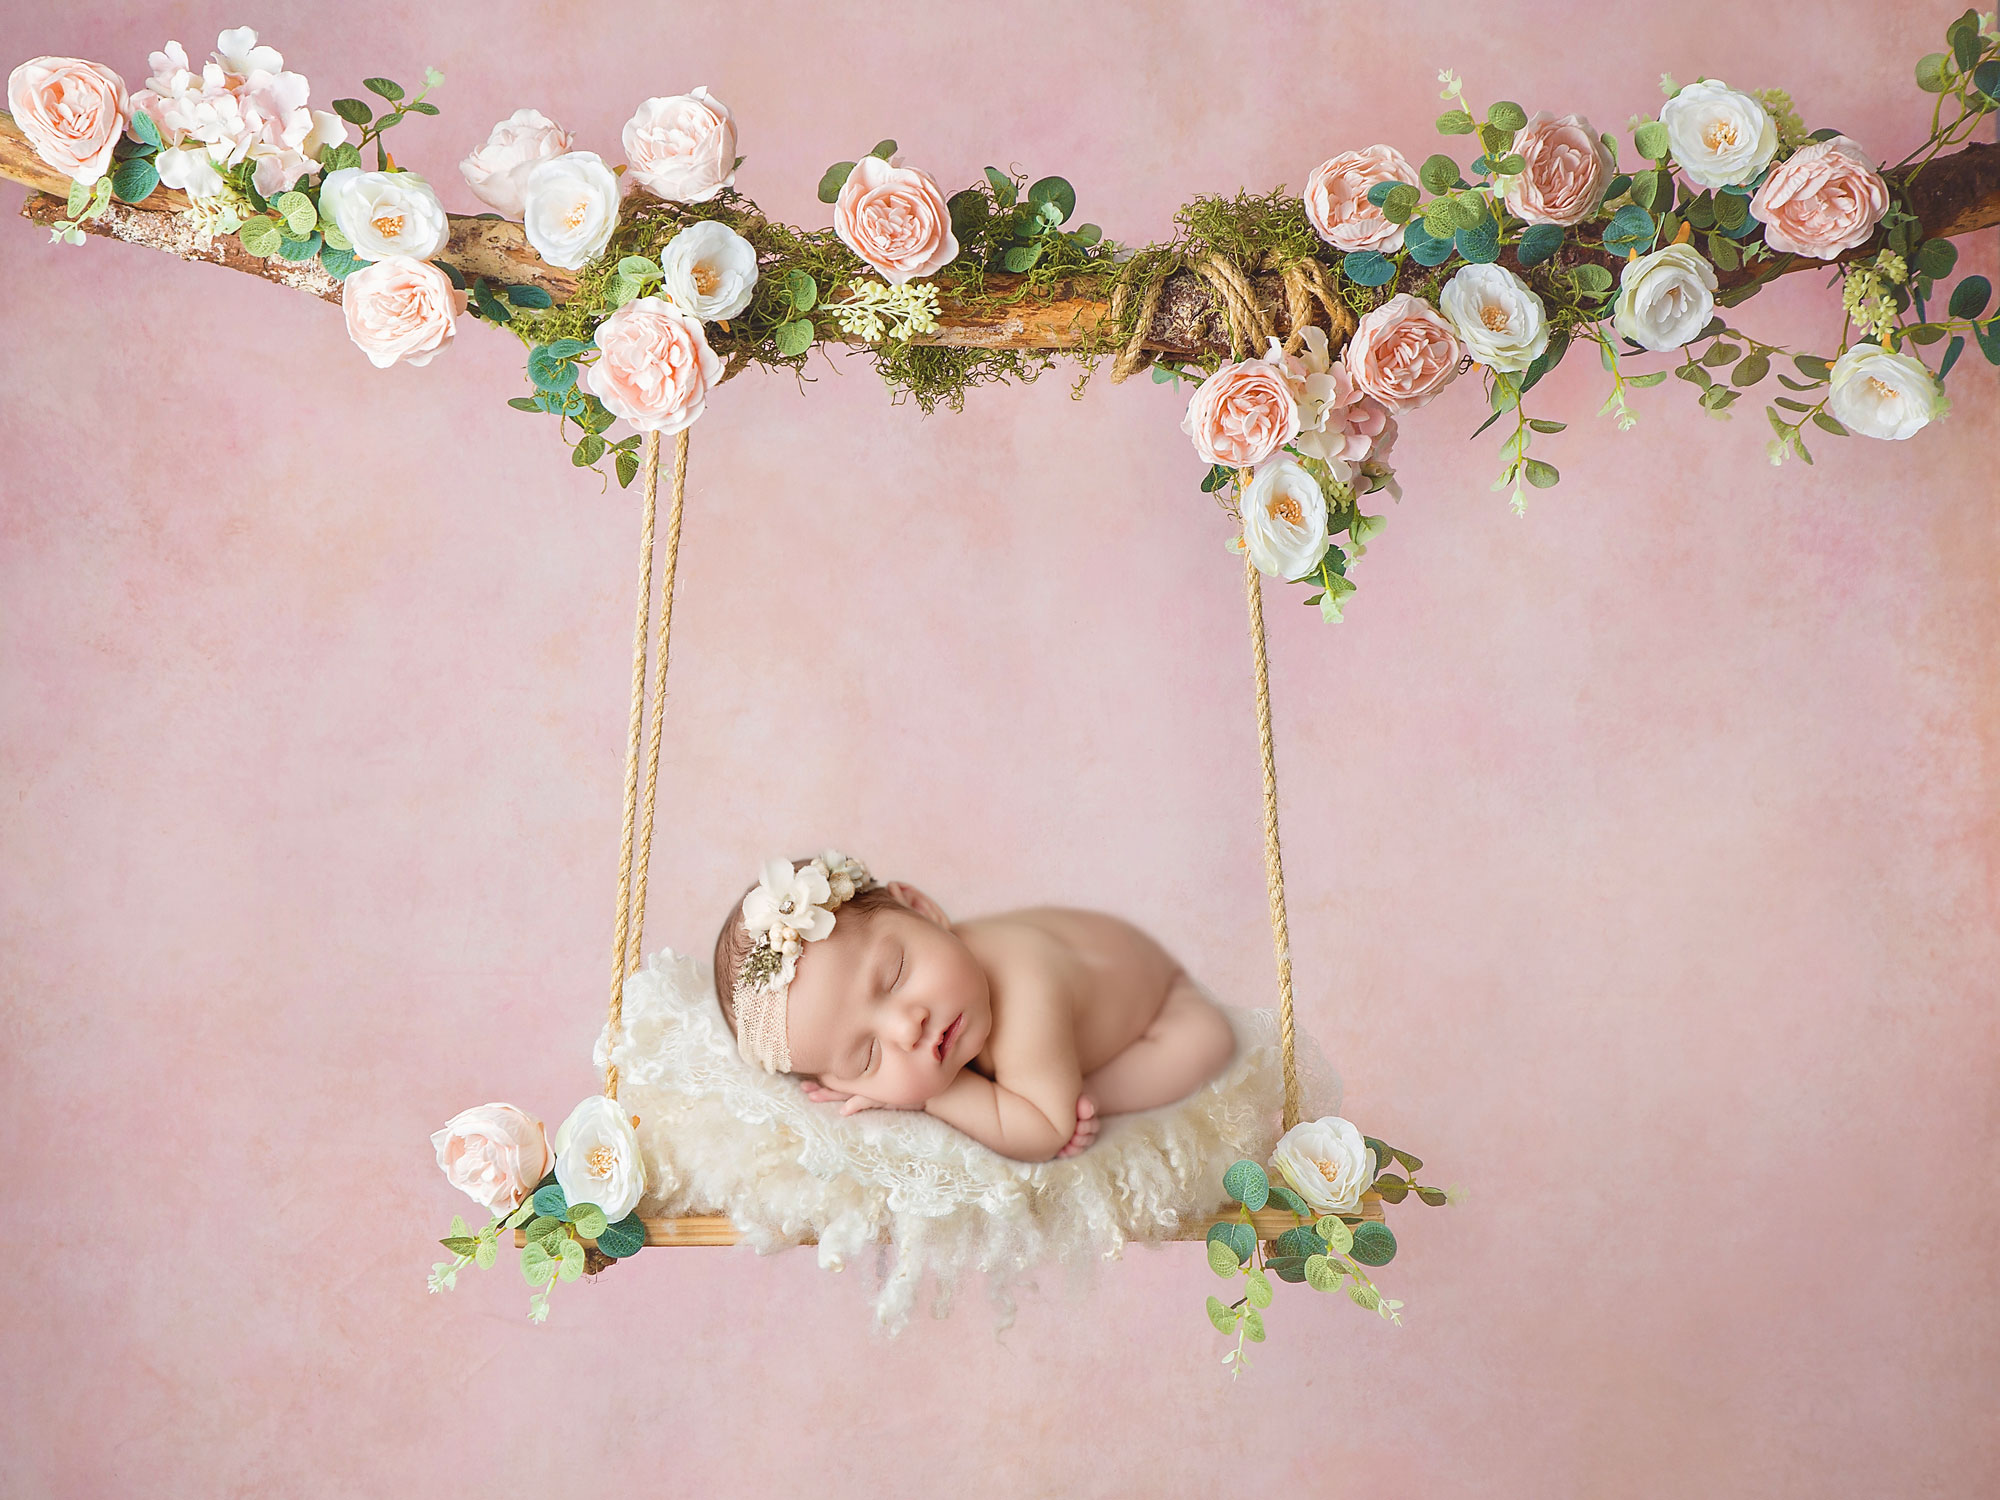 newborn photo ideas for photography session floral wreath swing 